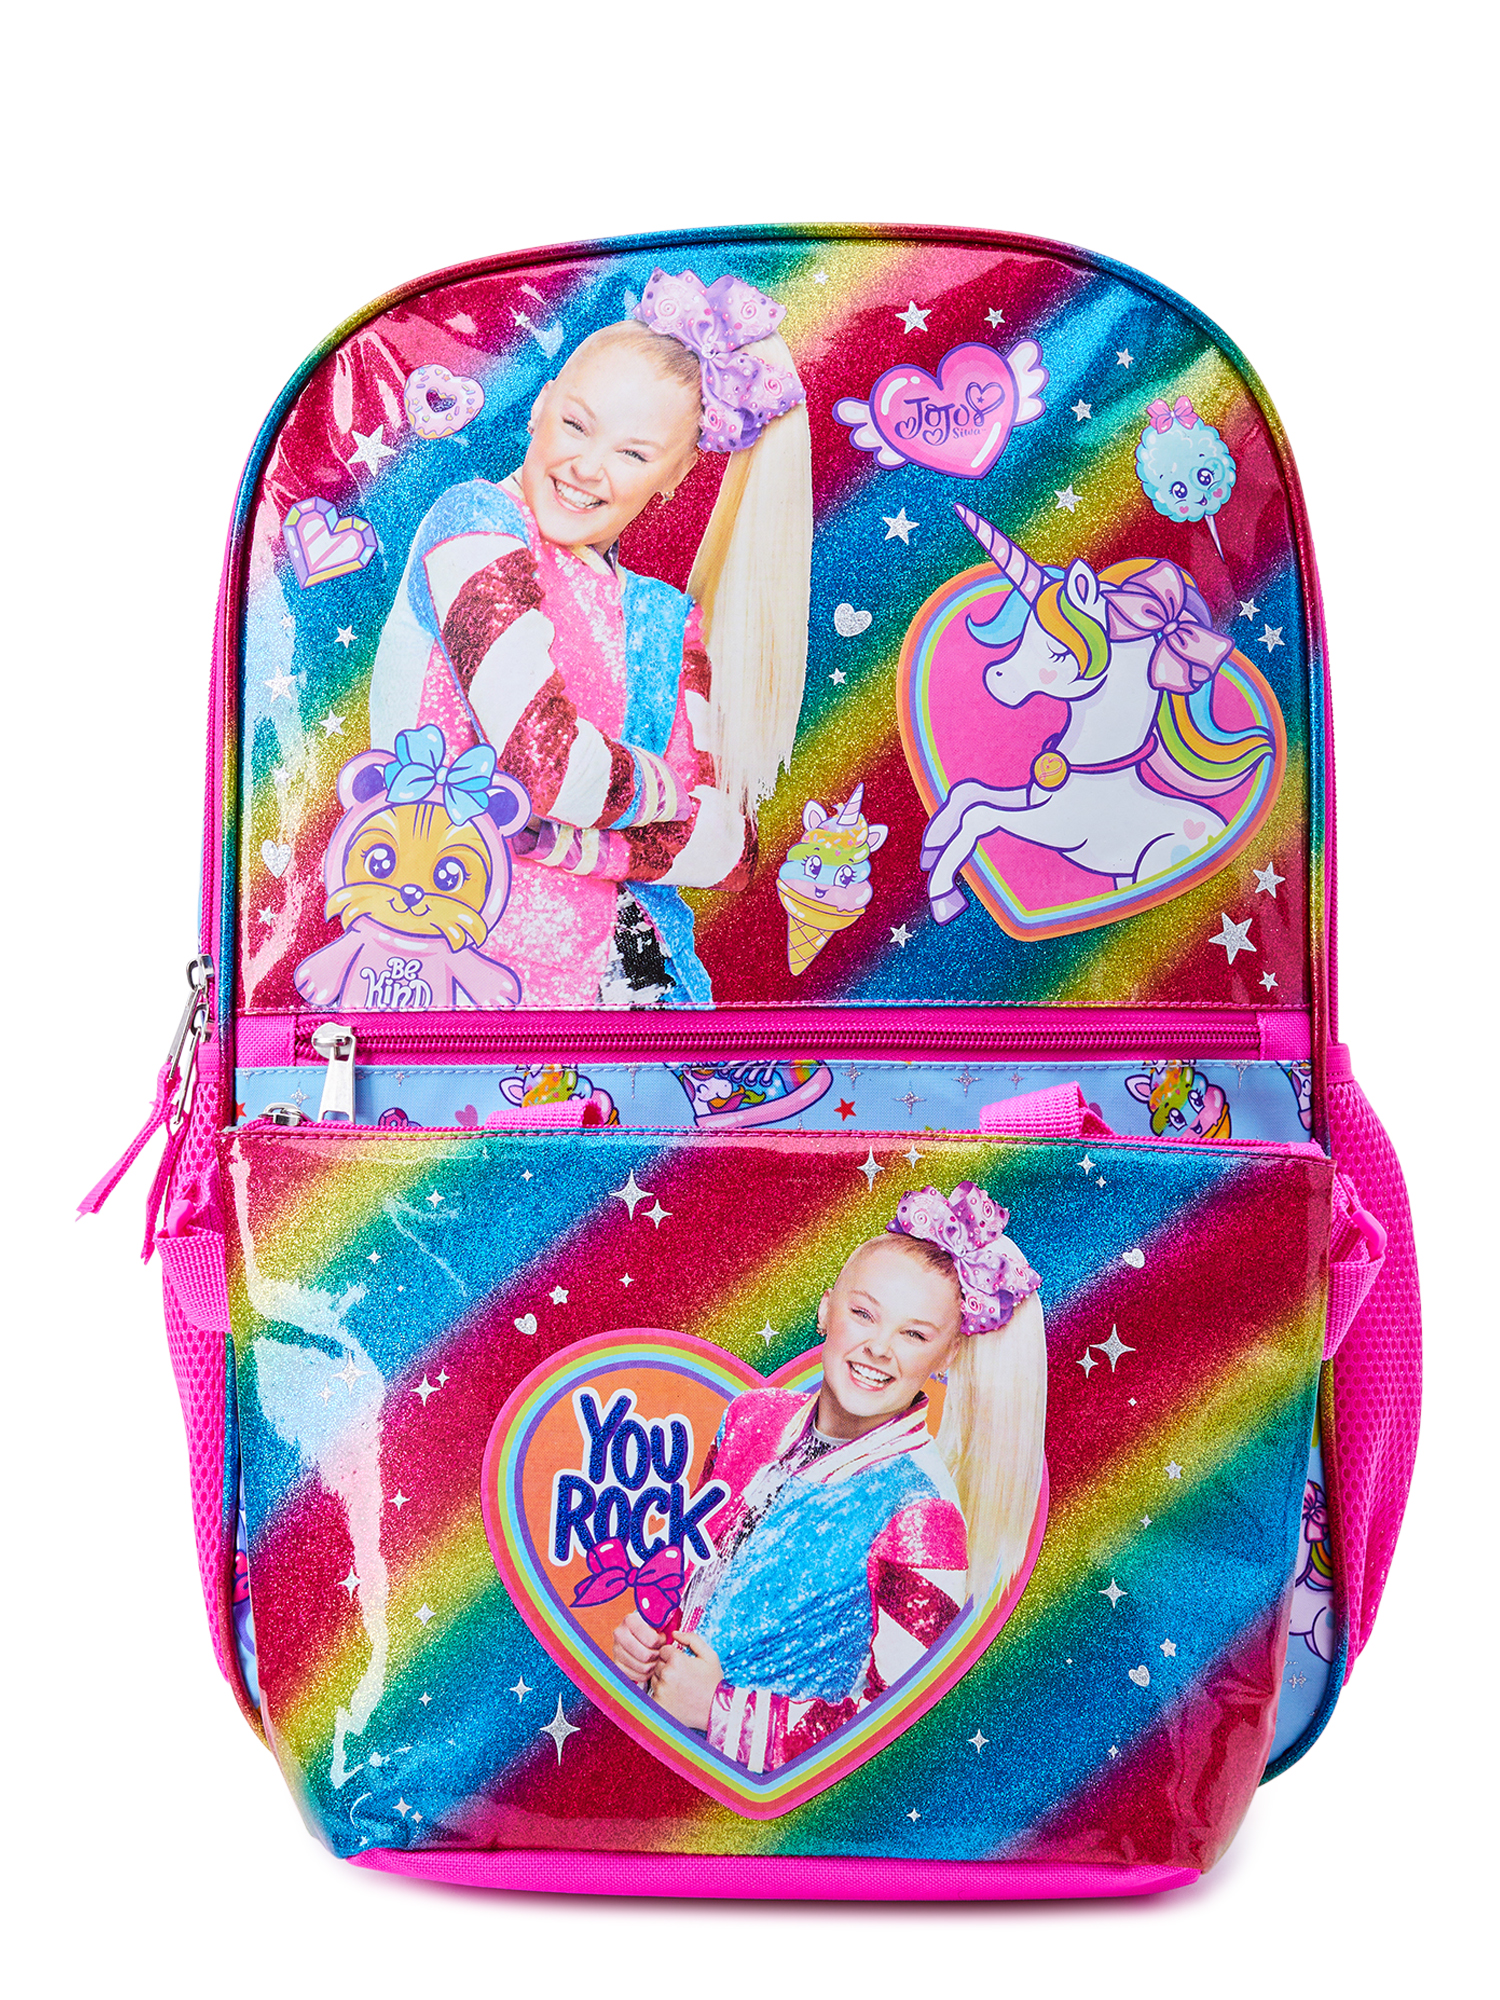 Jojo Siwa Rockin Rainbow Girls 17" Laptop Backpack 2-Piece Set with Lunch Tote Bag, Pink Multi-Color - image 3 of 4